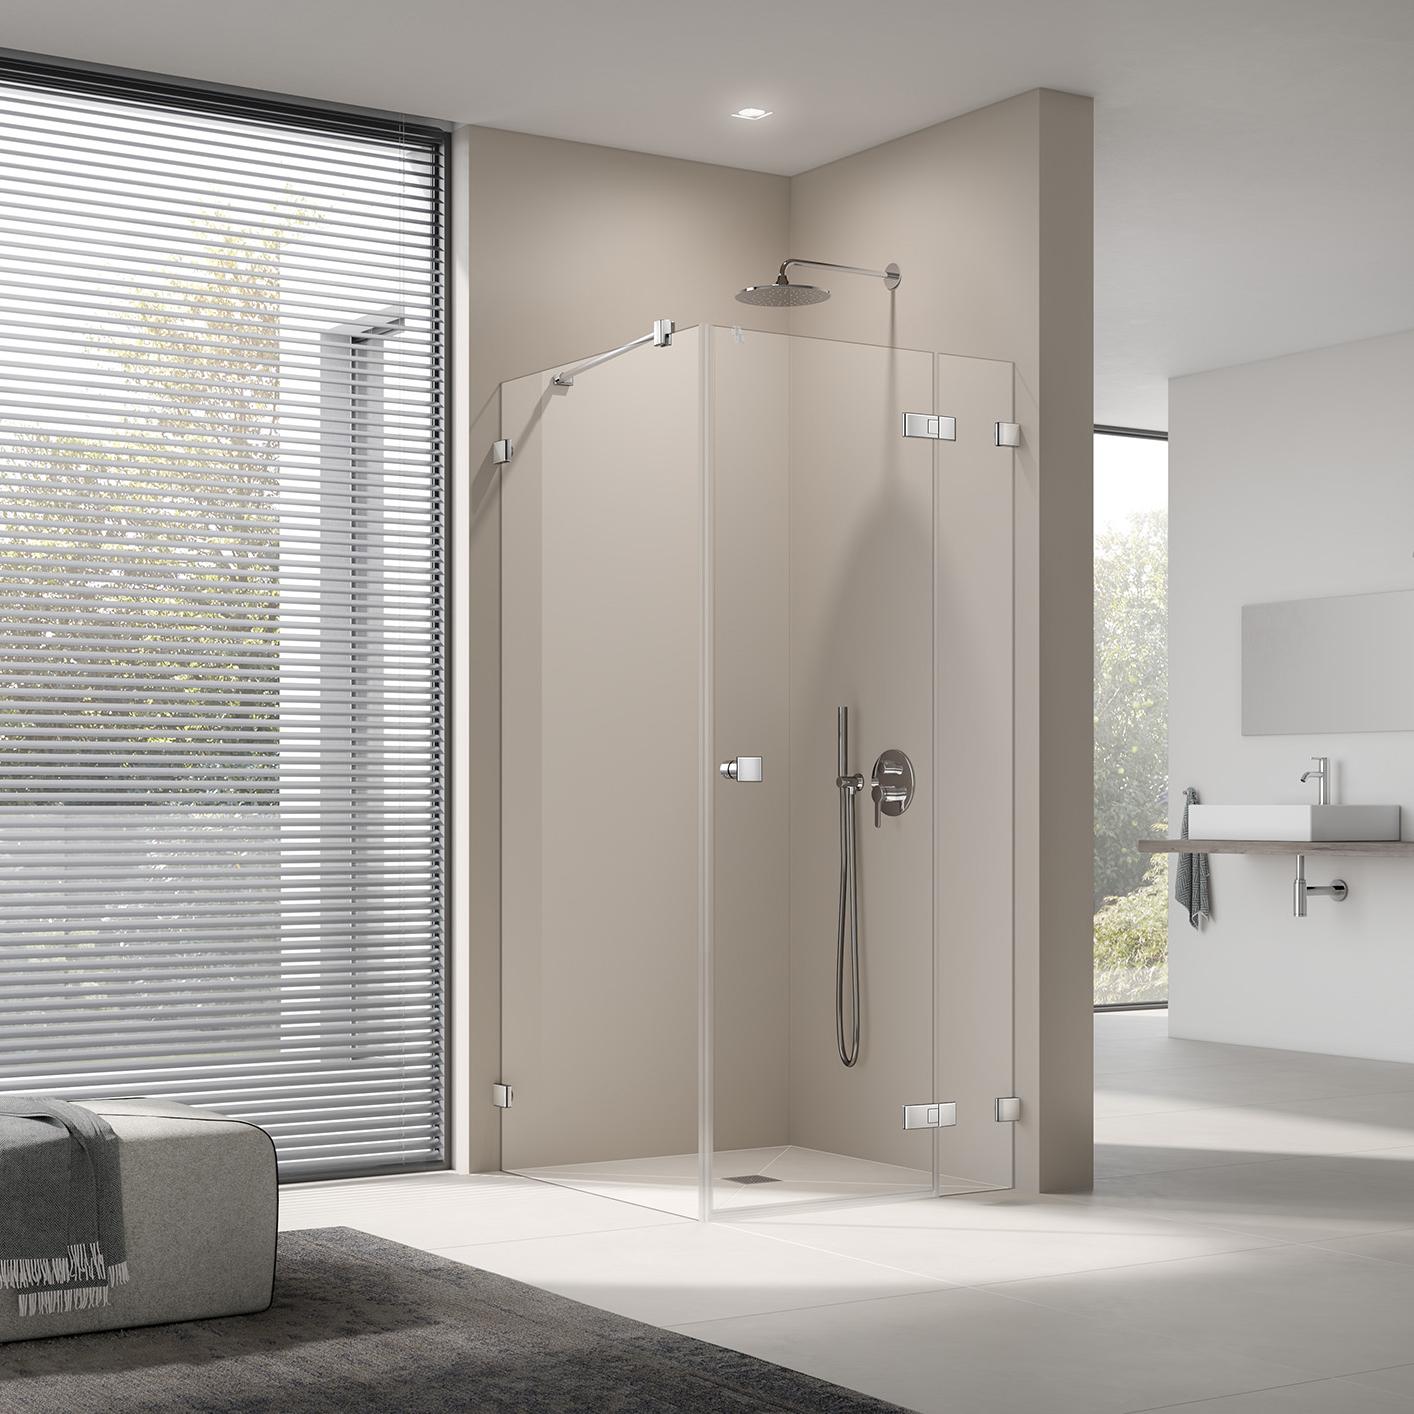 Kermi shower enclosure, MENA single panel hinged door with fixed panel with wall hinge